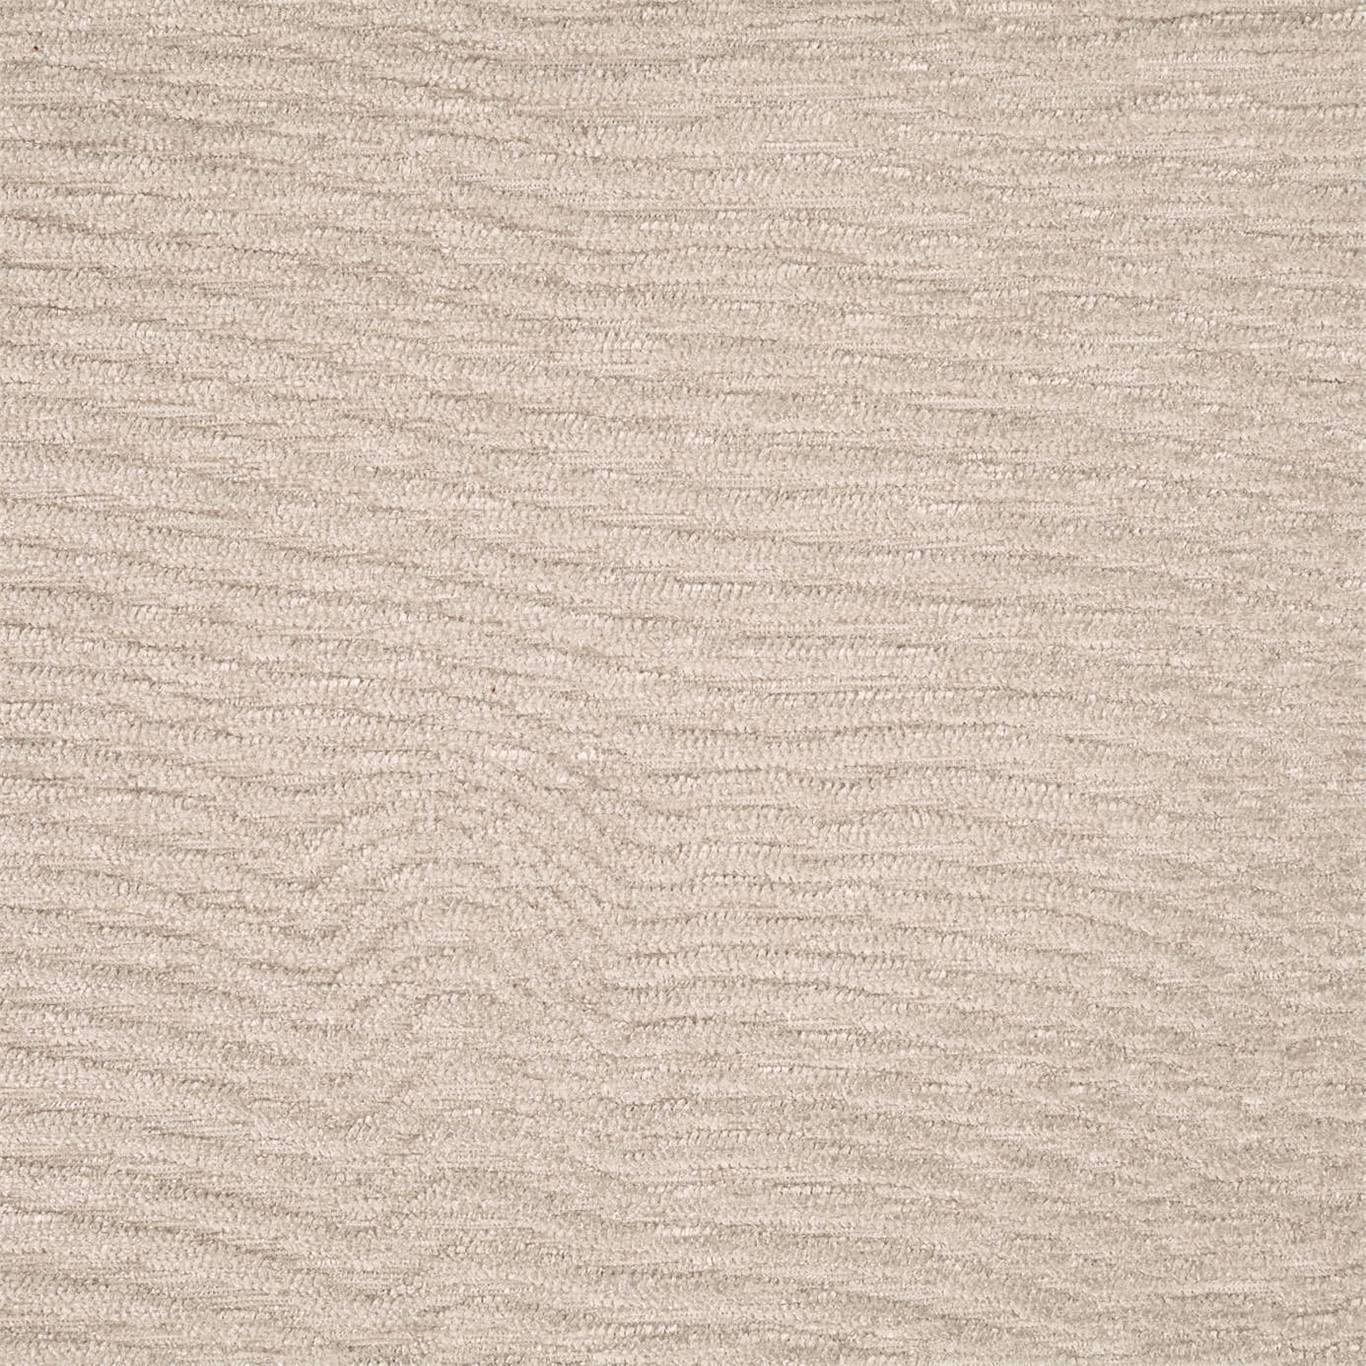 Waltz Wet Look Chenille Upholstery Fabric - Blush